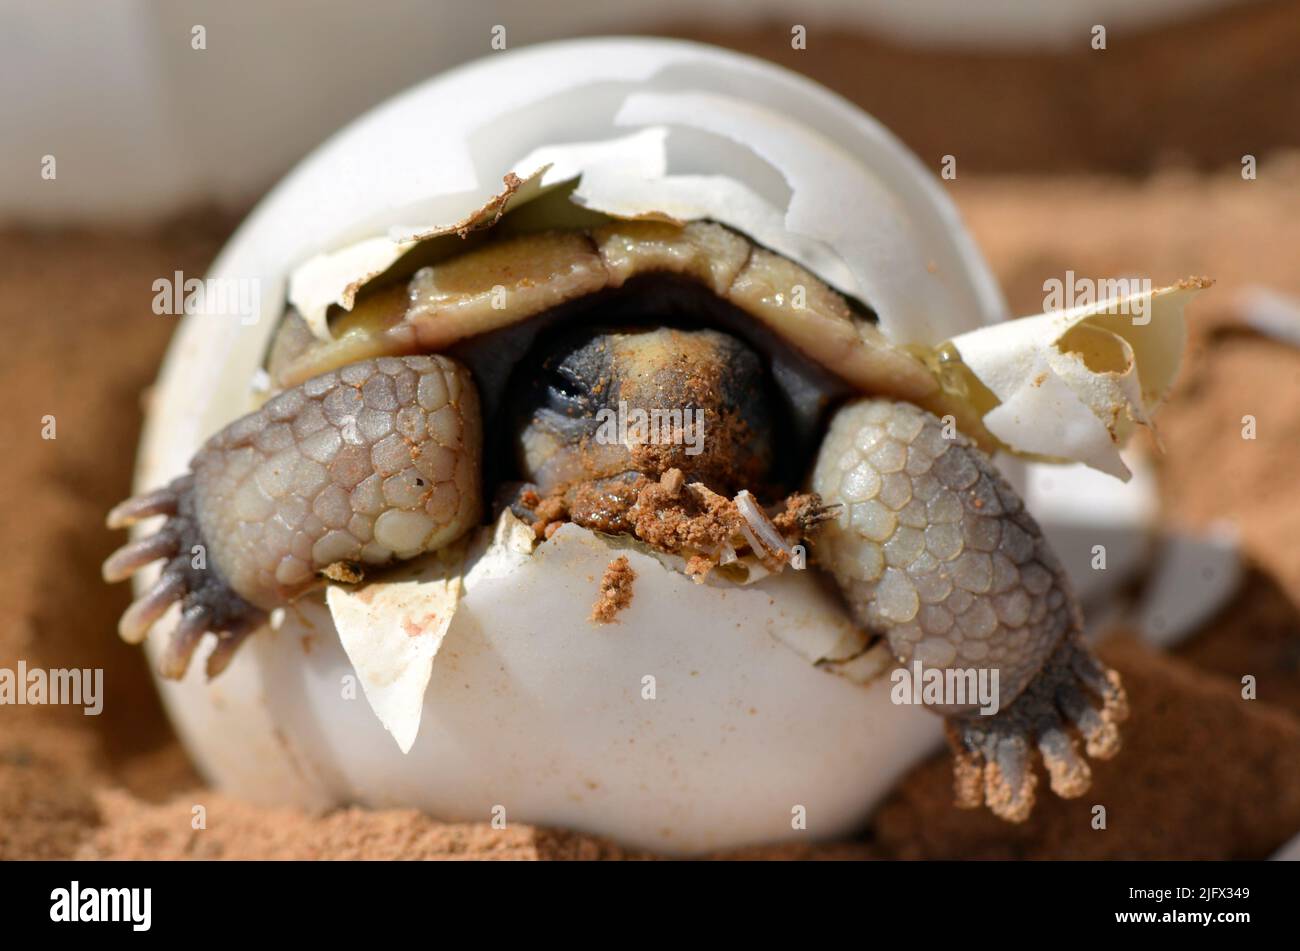 Baby Desert Tortoise  (Gopherus agassizii) hatching from its egg. Scientists study the life history and ecology of the desert tortoise, which is a federally listed threatened species only found in the Mojave Desert.Young tortoises are especially prone to predators like dogs and ravens, whose numbers can increase around areas of human activity and structures. Adult tortoises can be killed by car traffic, ingesting rubbish, and wildfires, and are affected by loss of habitat from urban and industrial development, cutting short their potential lifespan of 100 years. Credit: KK.Drake / USGS Stock Photo